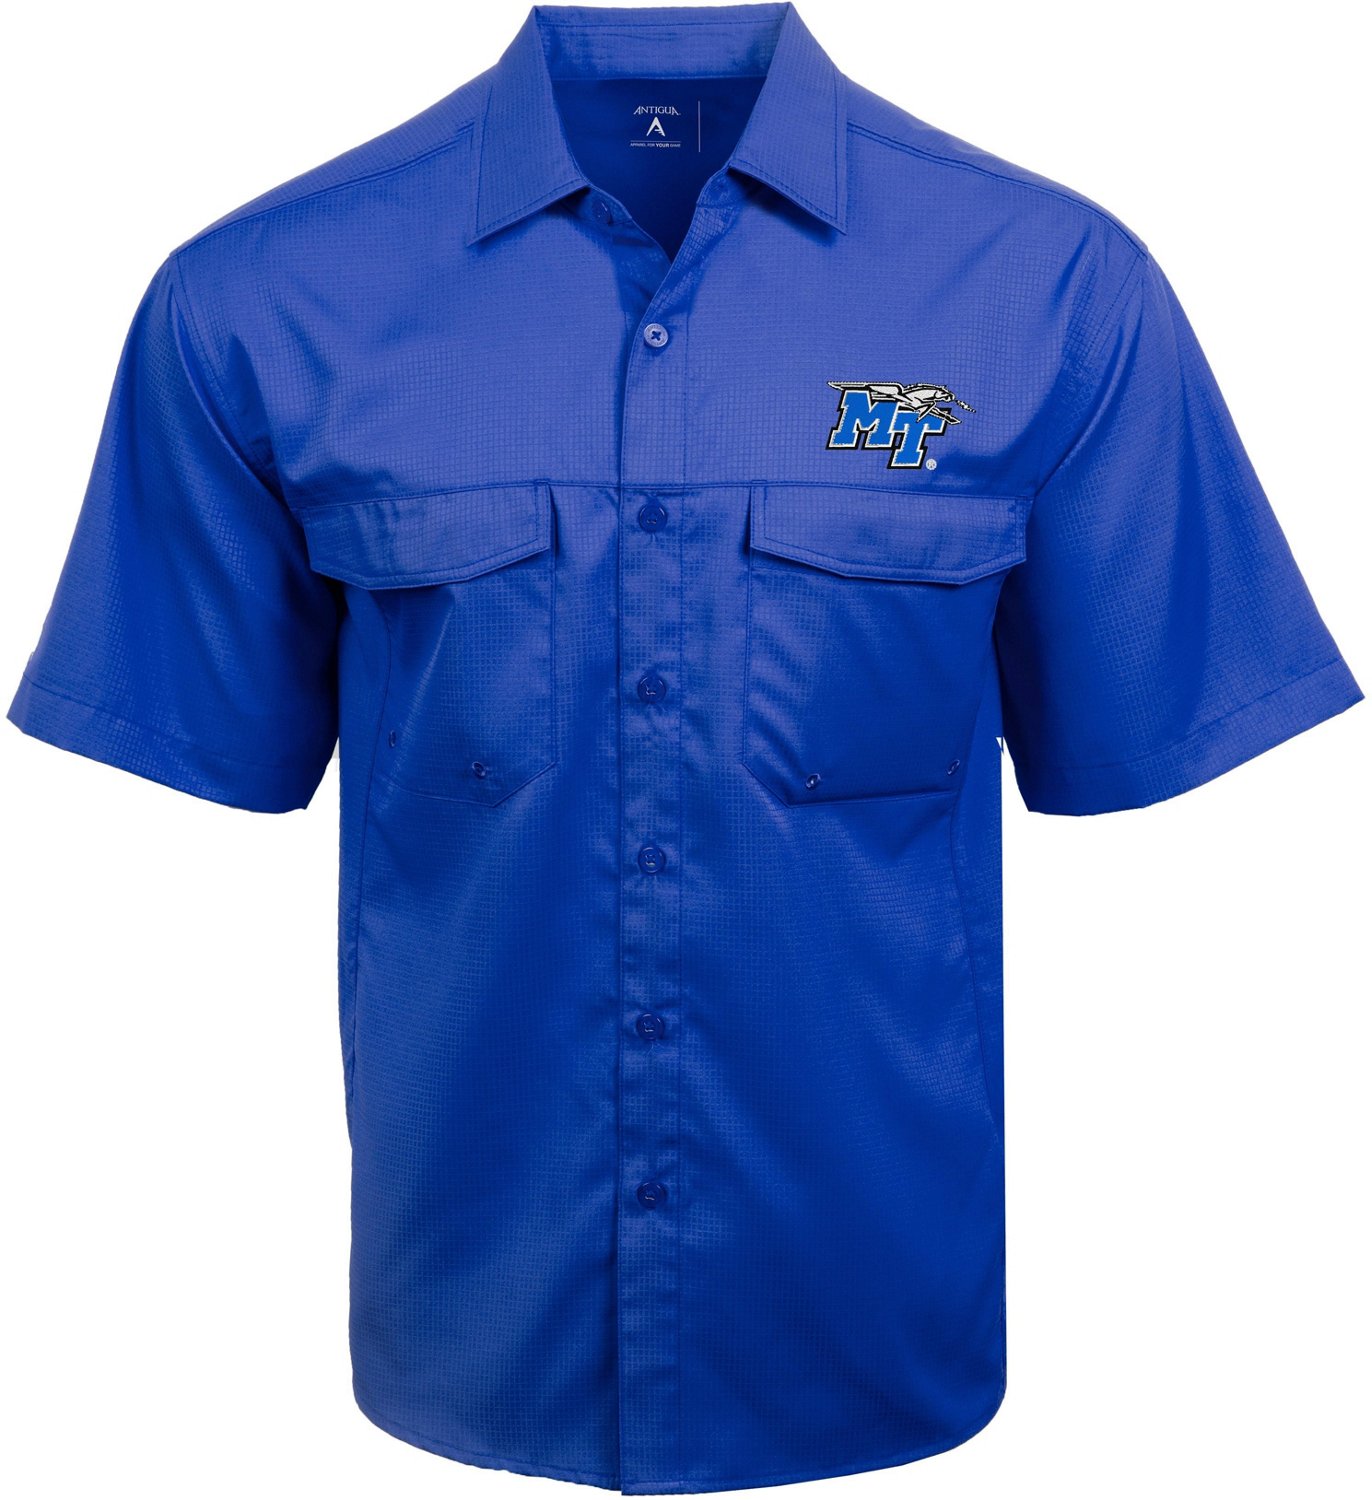 Antigua Men's Middle Tennessee State University Game Day Woven Fishing ...